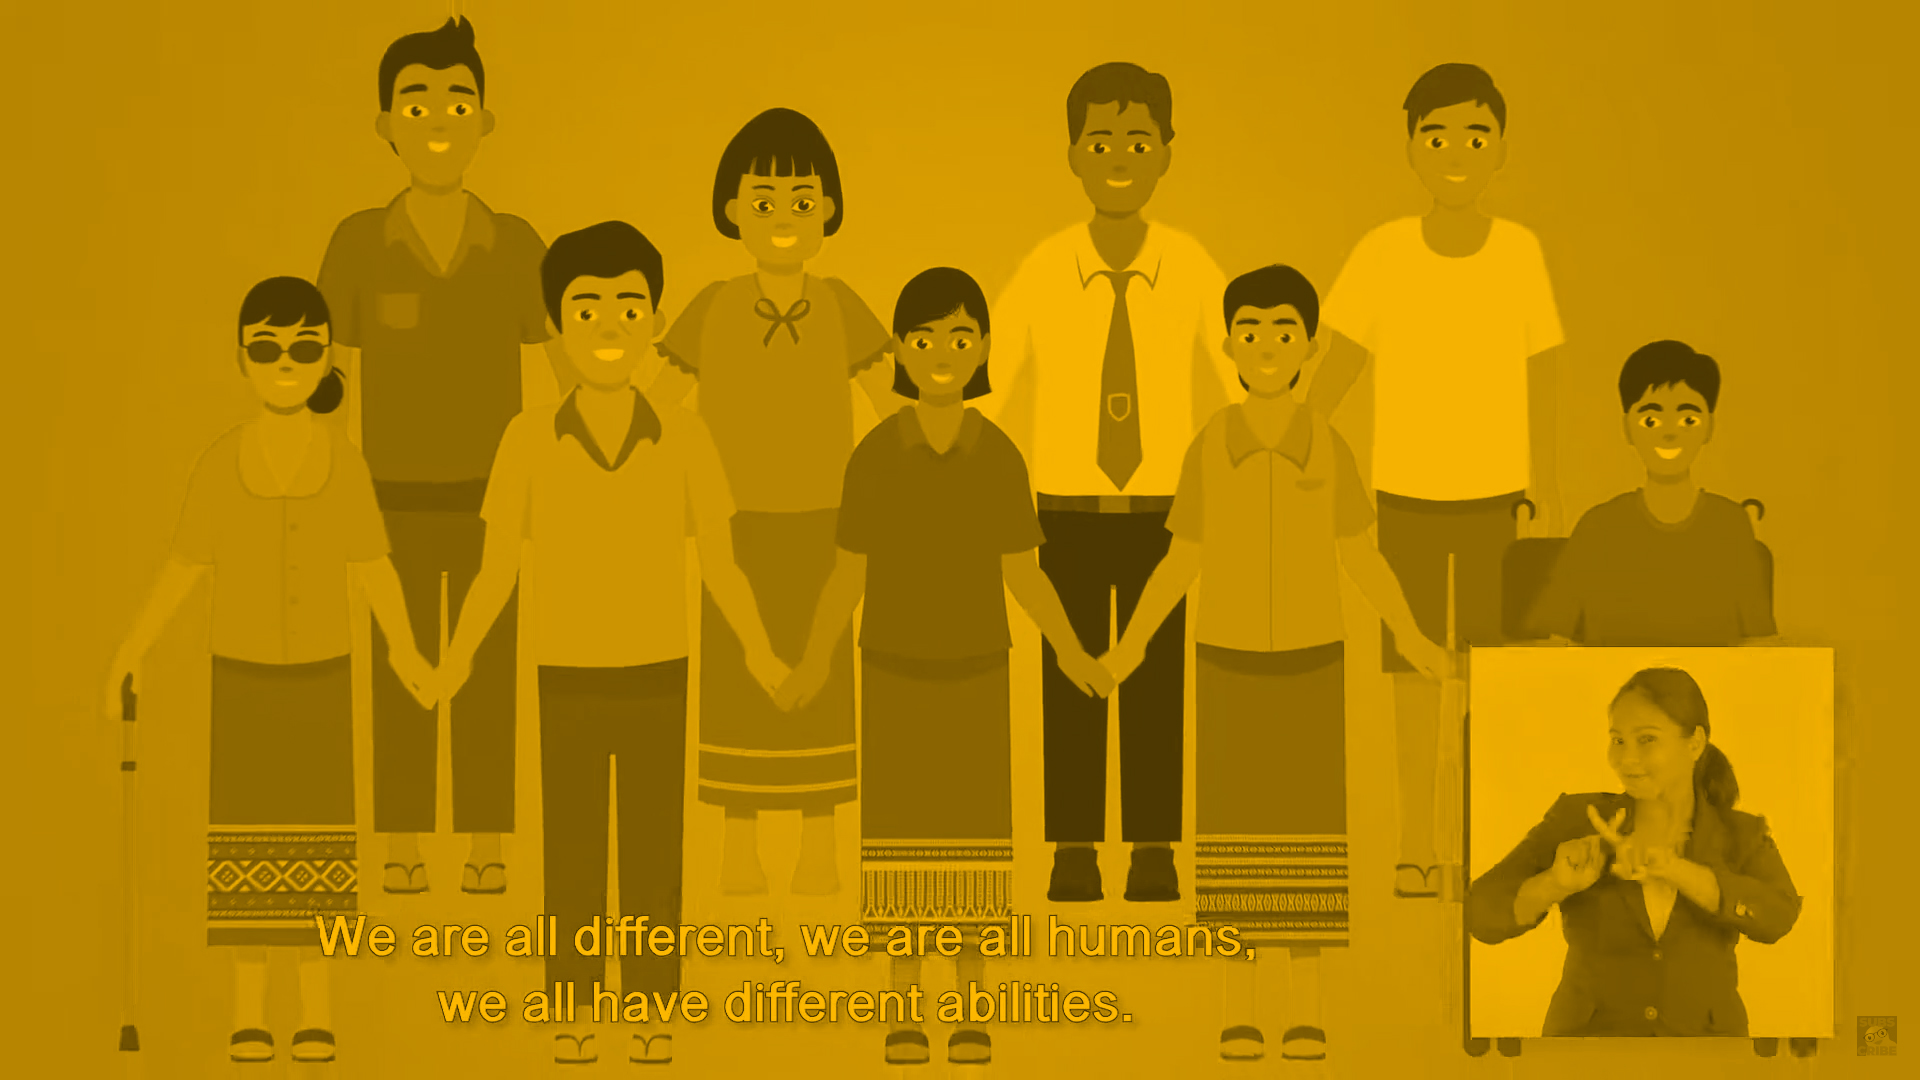 Disability Rights Animation for BABSEACLE by Play Creative Lab